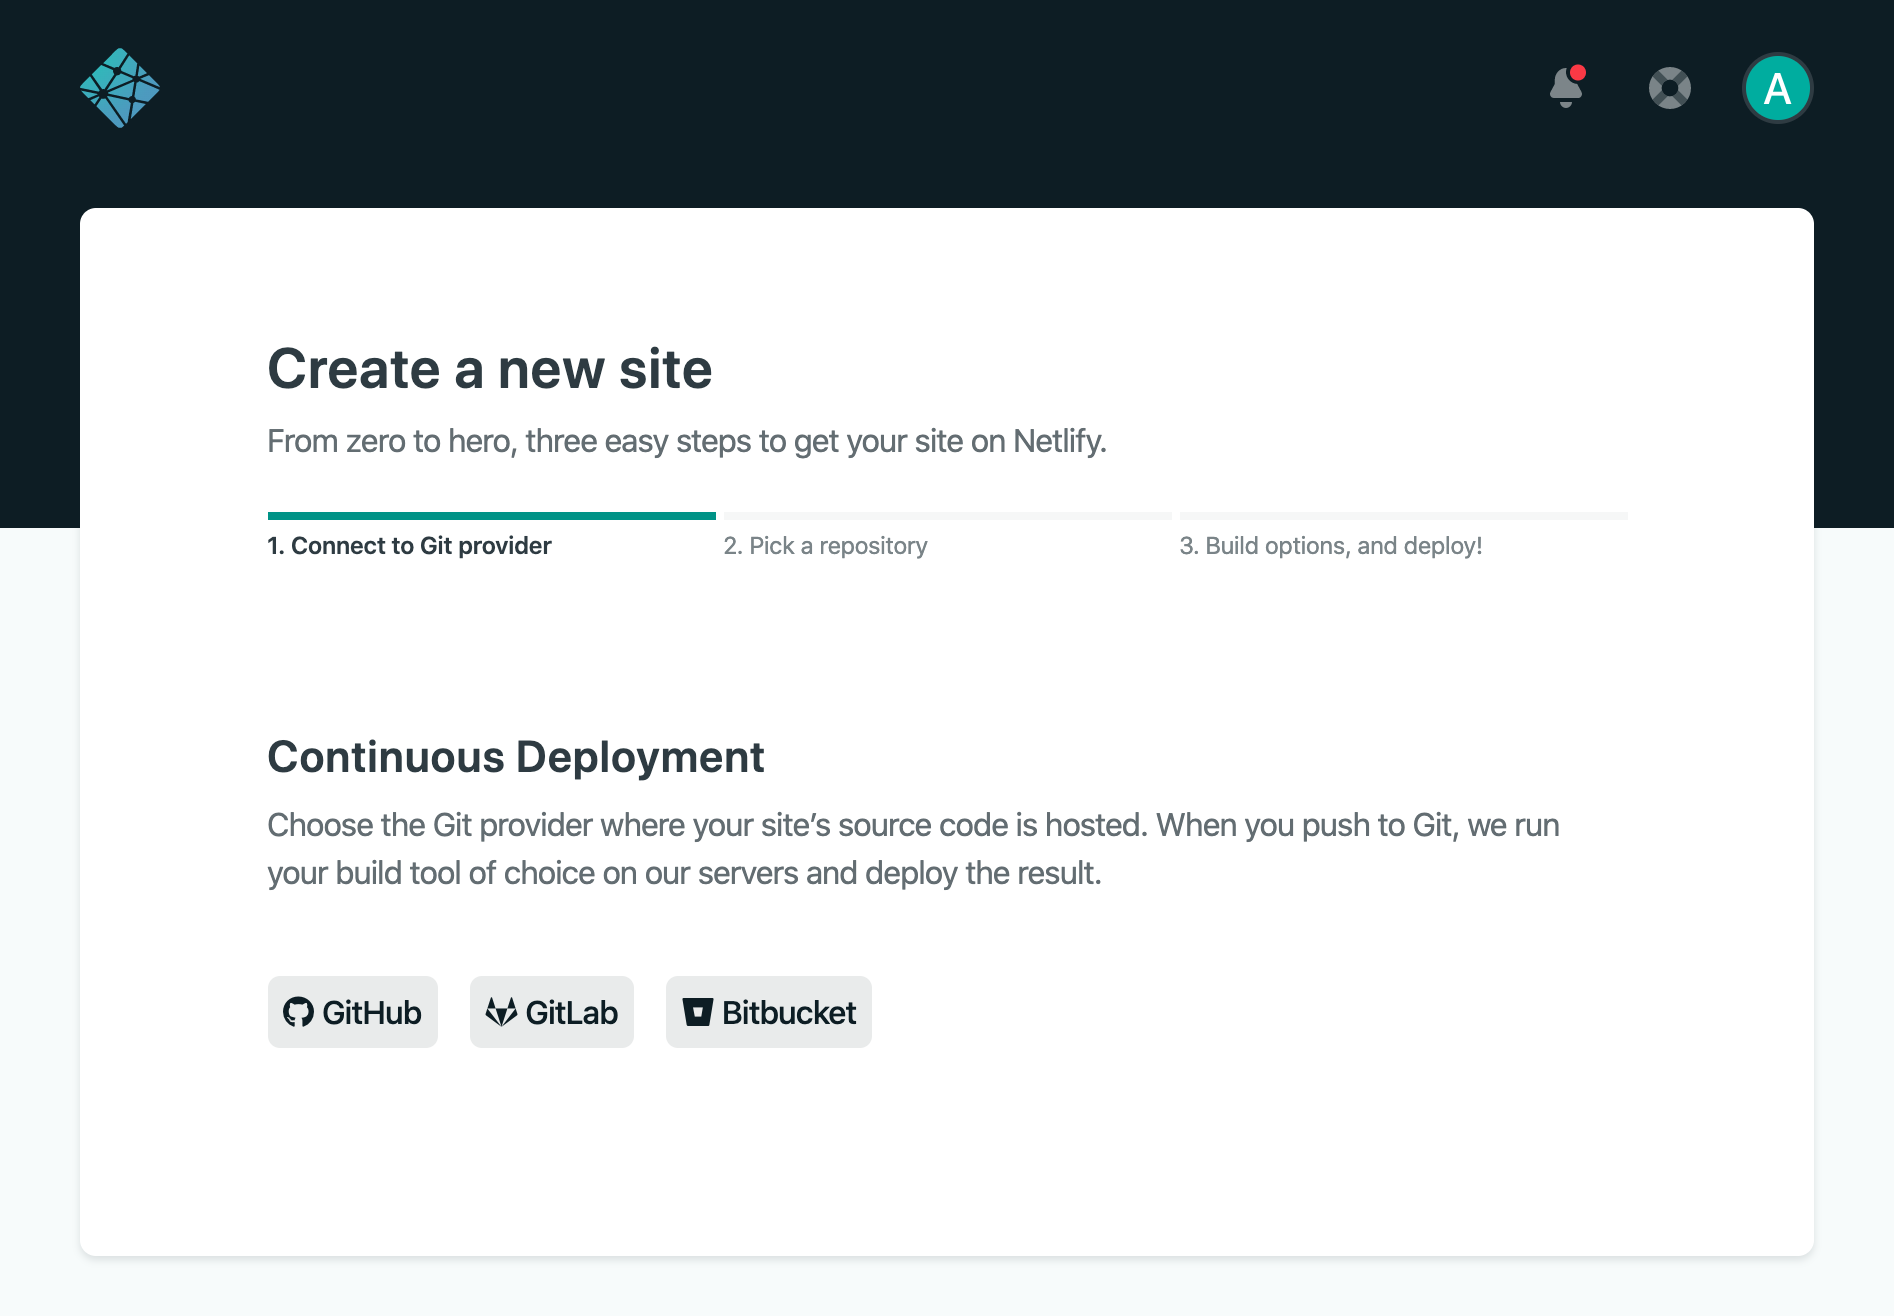 Create a new site from github